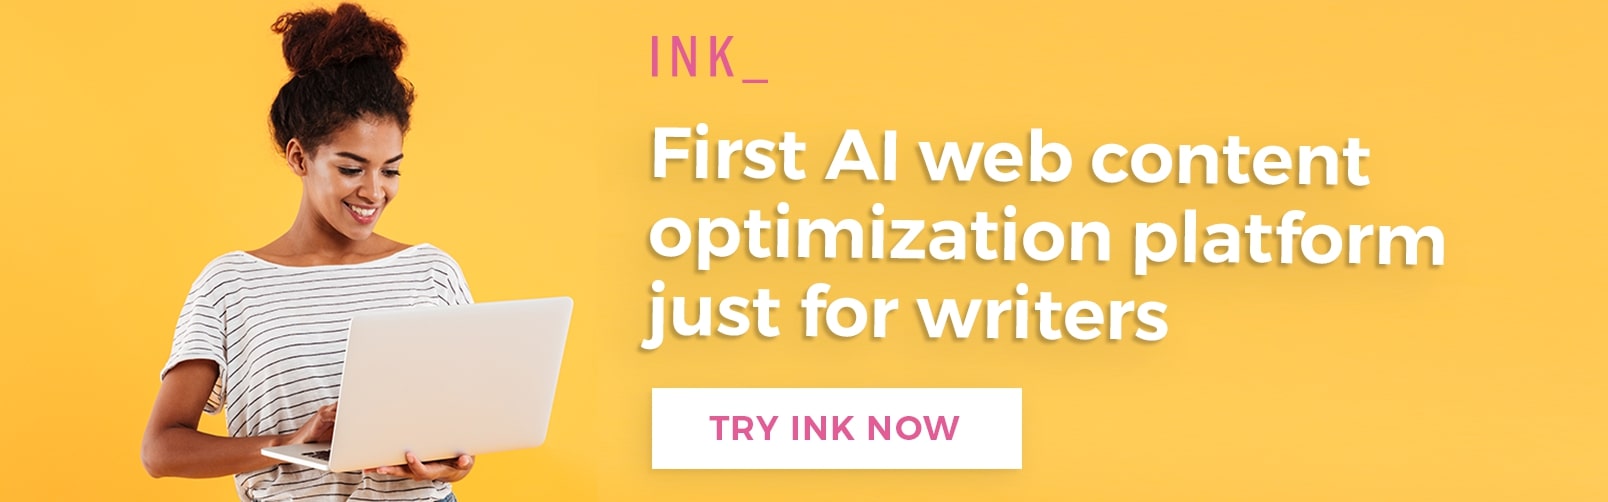 First AI Web Content Optimization Platform Just for Writers